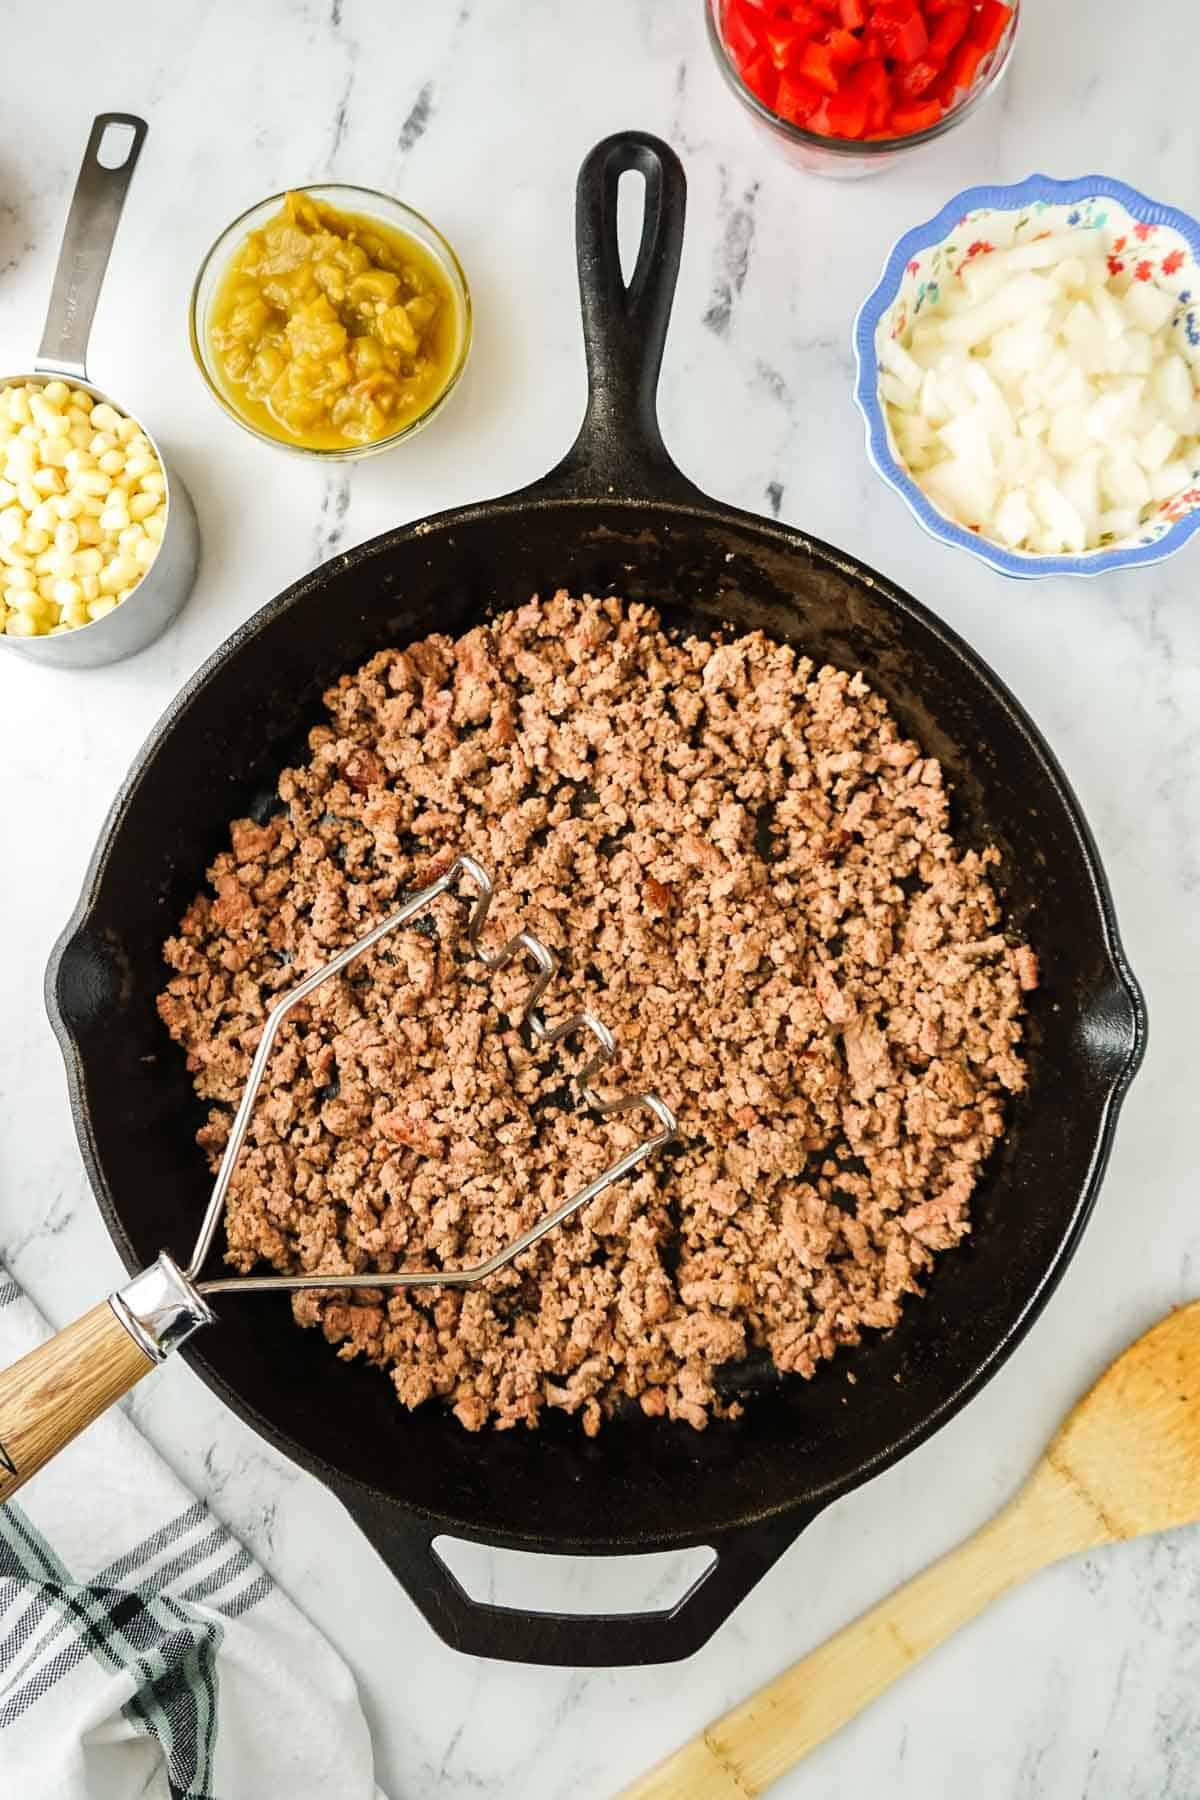 Ground beef browning in a cast iron skillet.